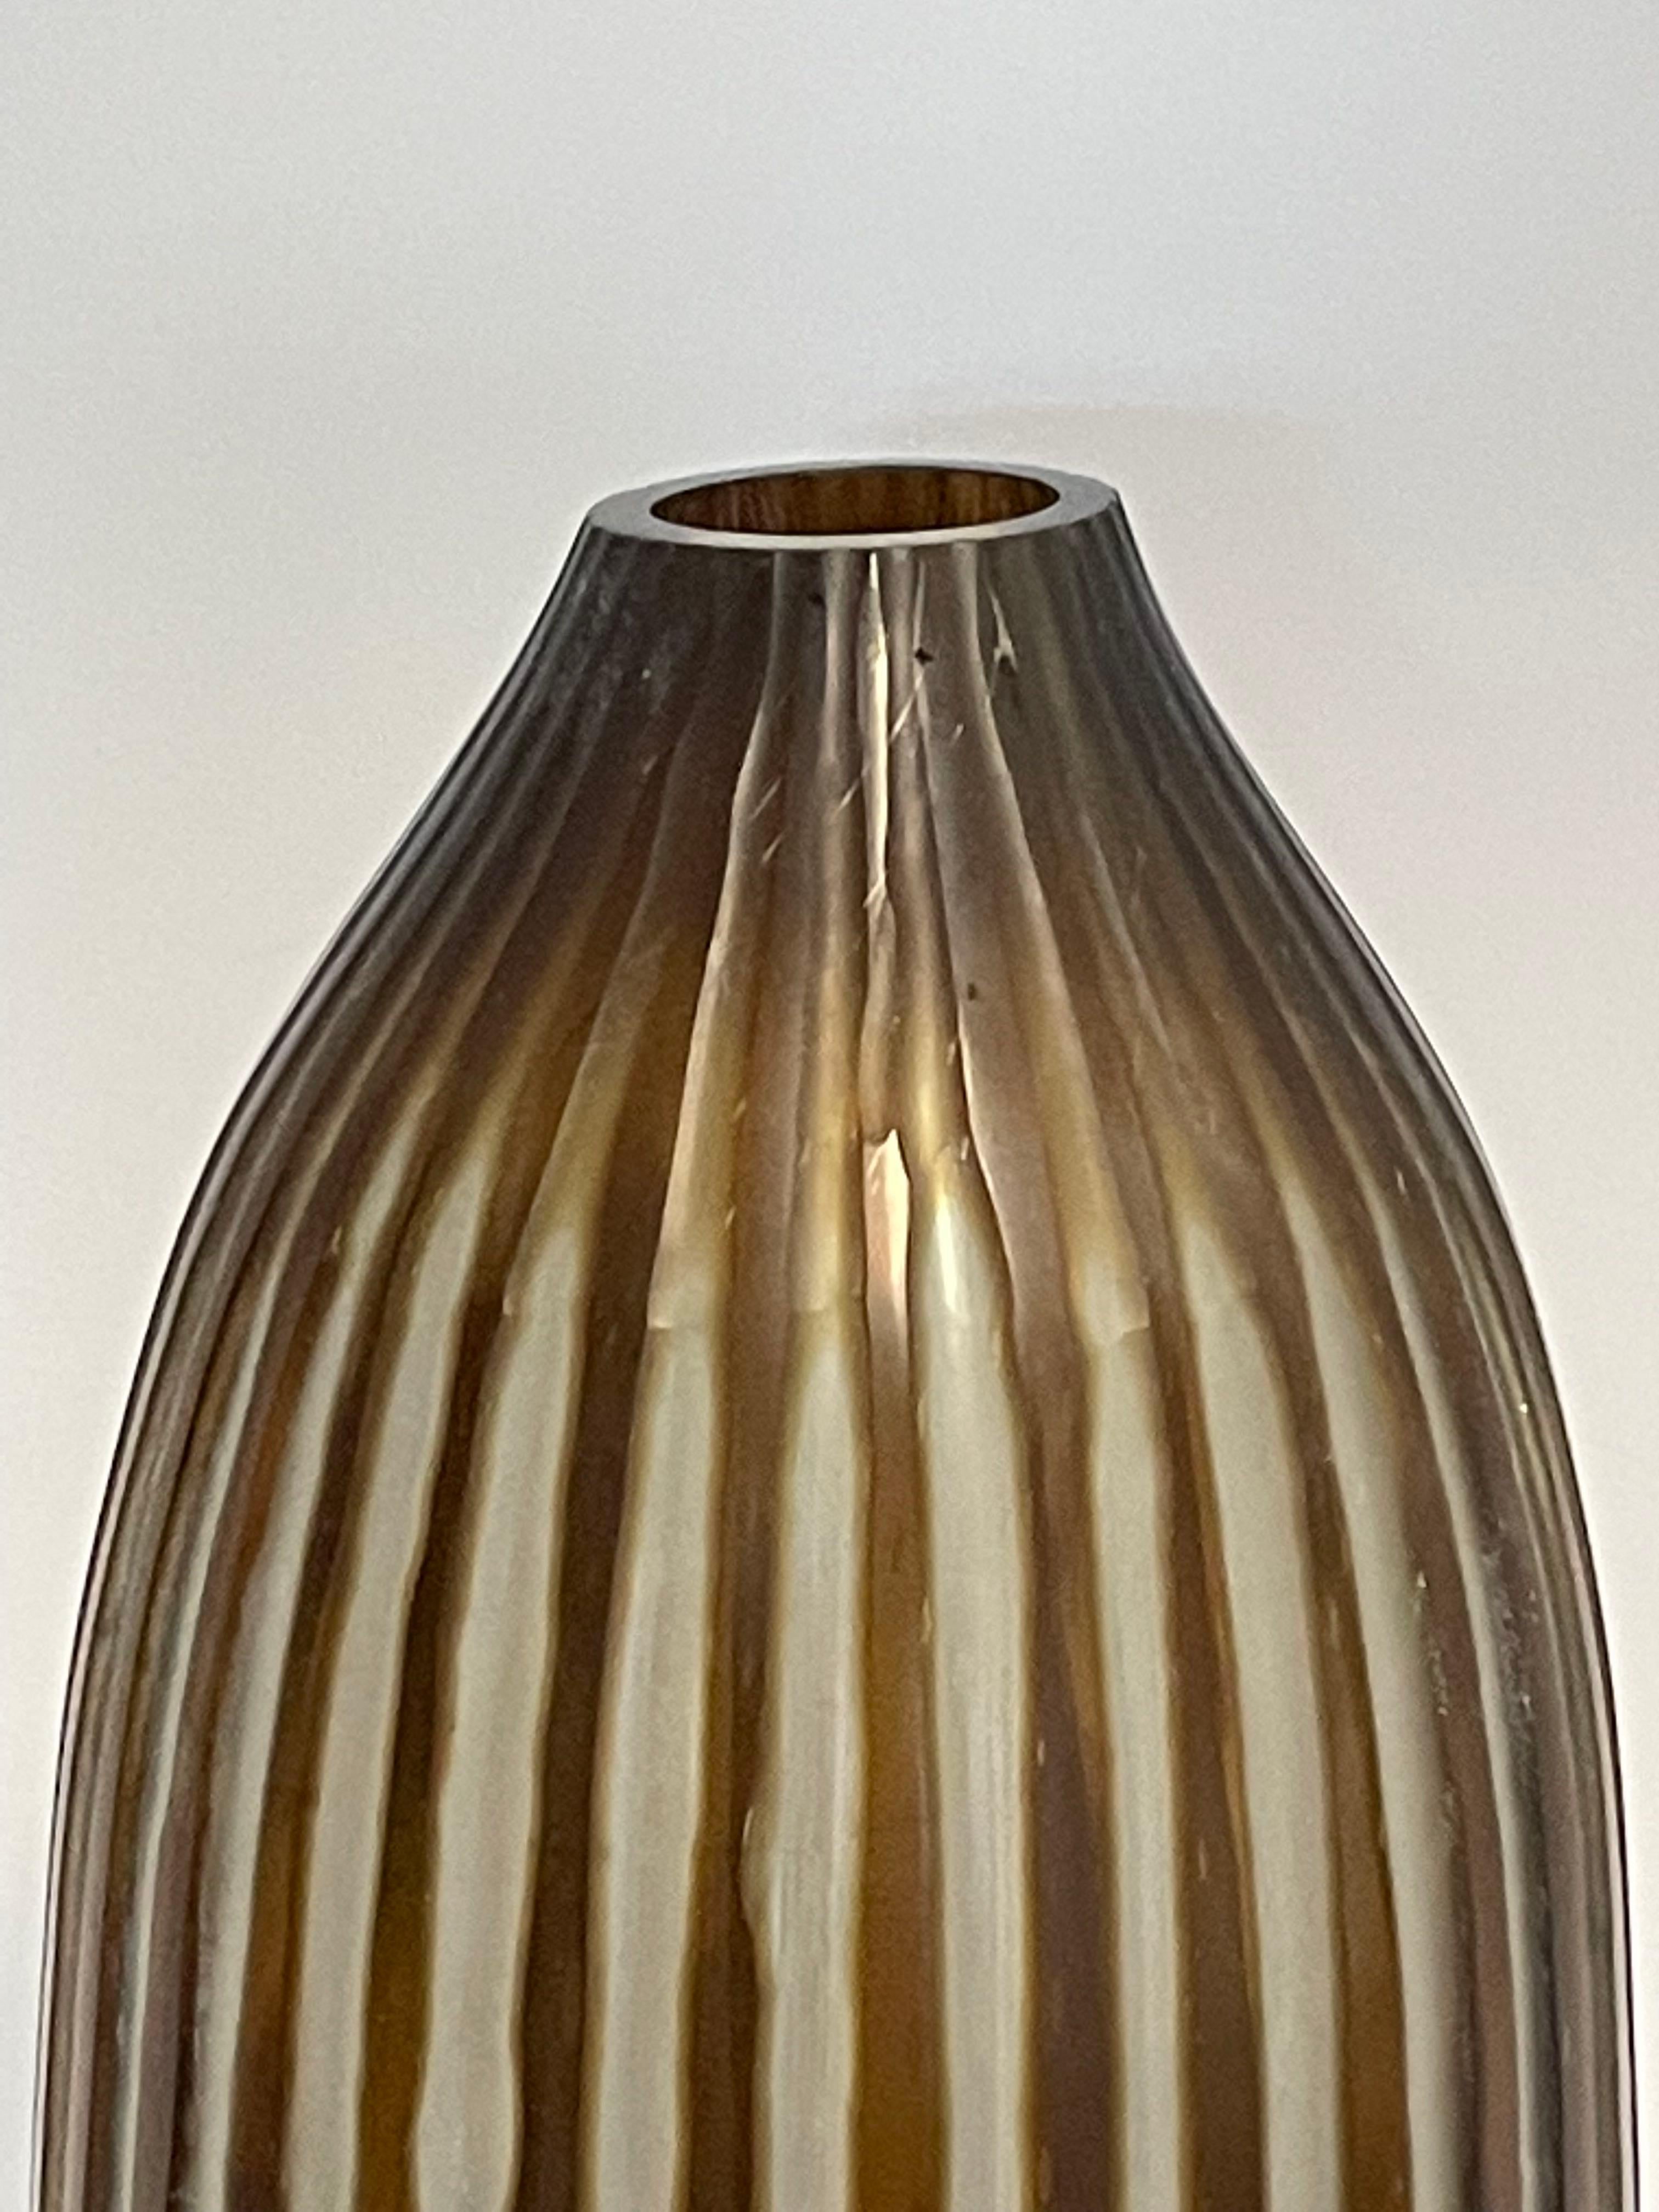 tall brown glass vase